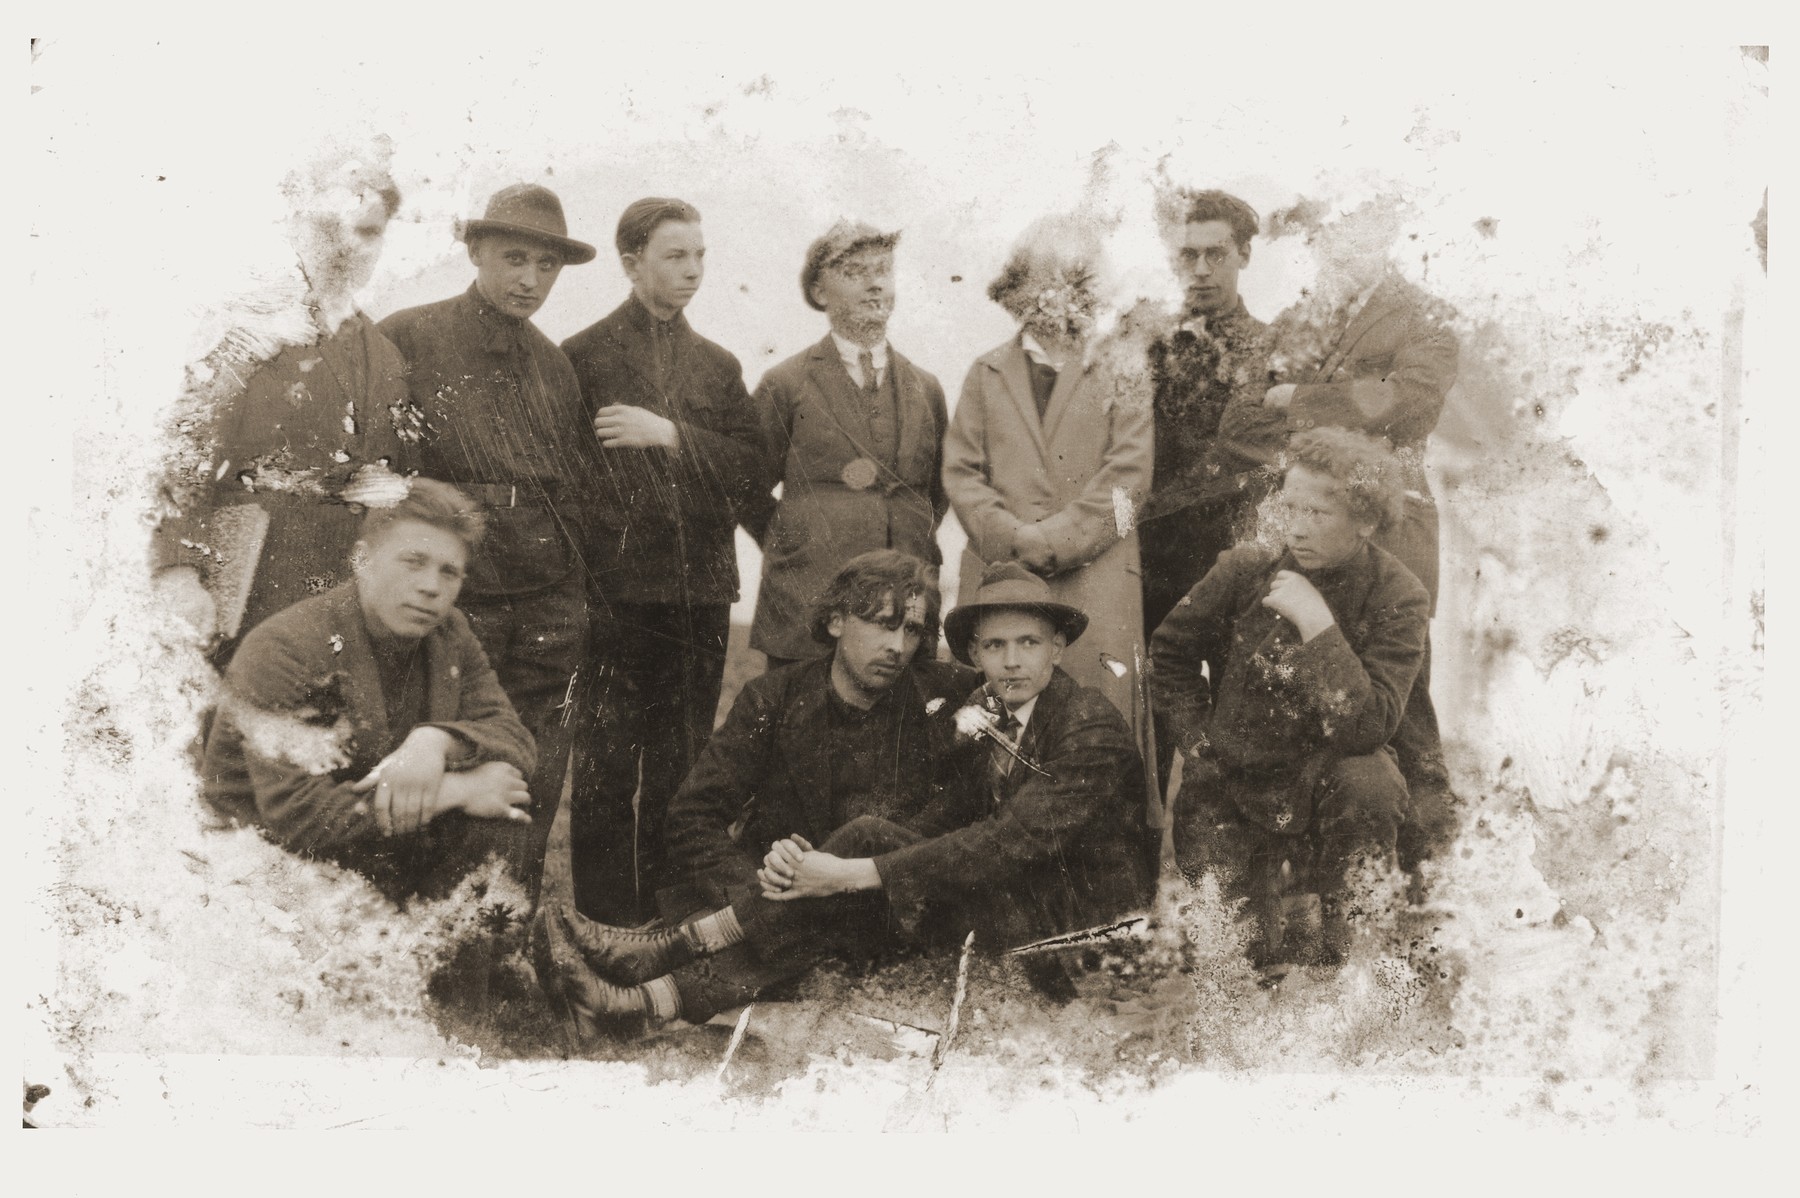 Damaged photograph of a group of artist friends in Kovno, Lithuania that survived the destruction of the Kovno ghetto.

Among those pictured is the artist Jacob Lifschitz (standing, second from right).  The photograph was buried with the artist's drawings shortly before the liquidation of the ghetto, and retrieved by his wife after the liberation.